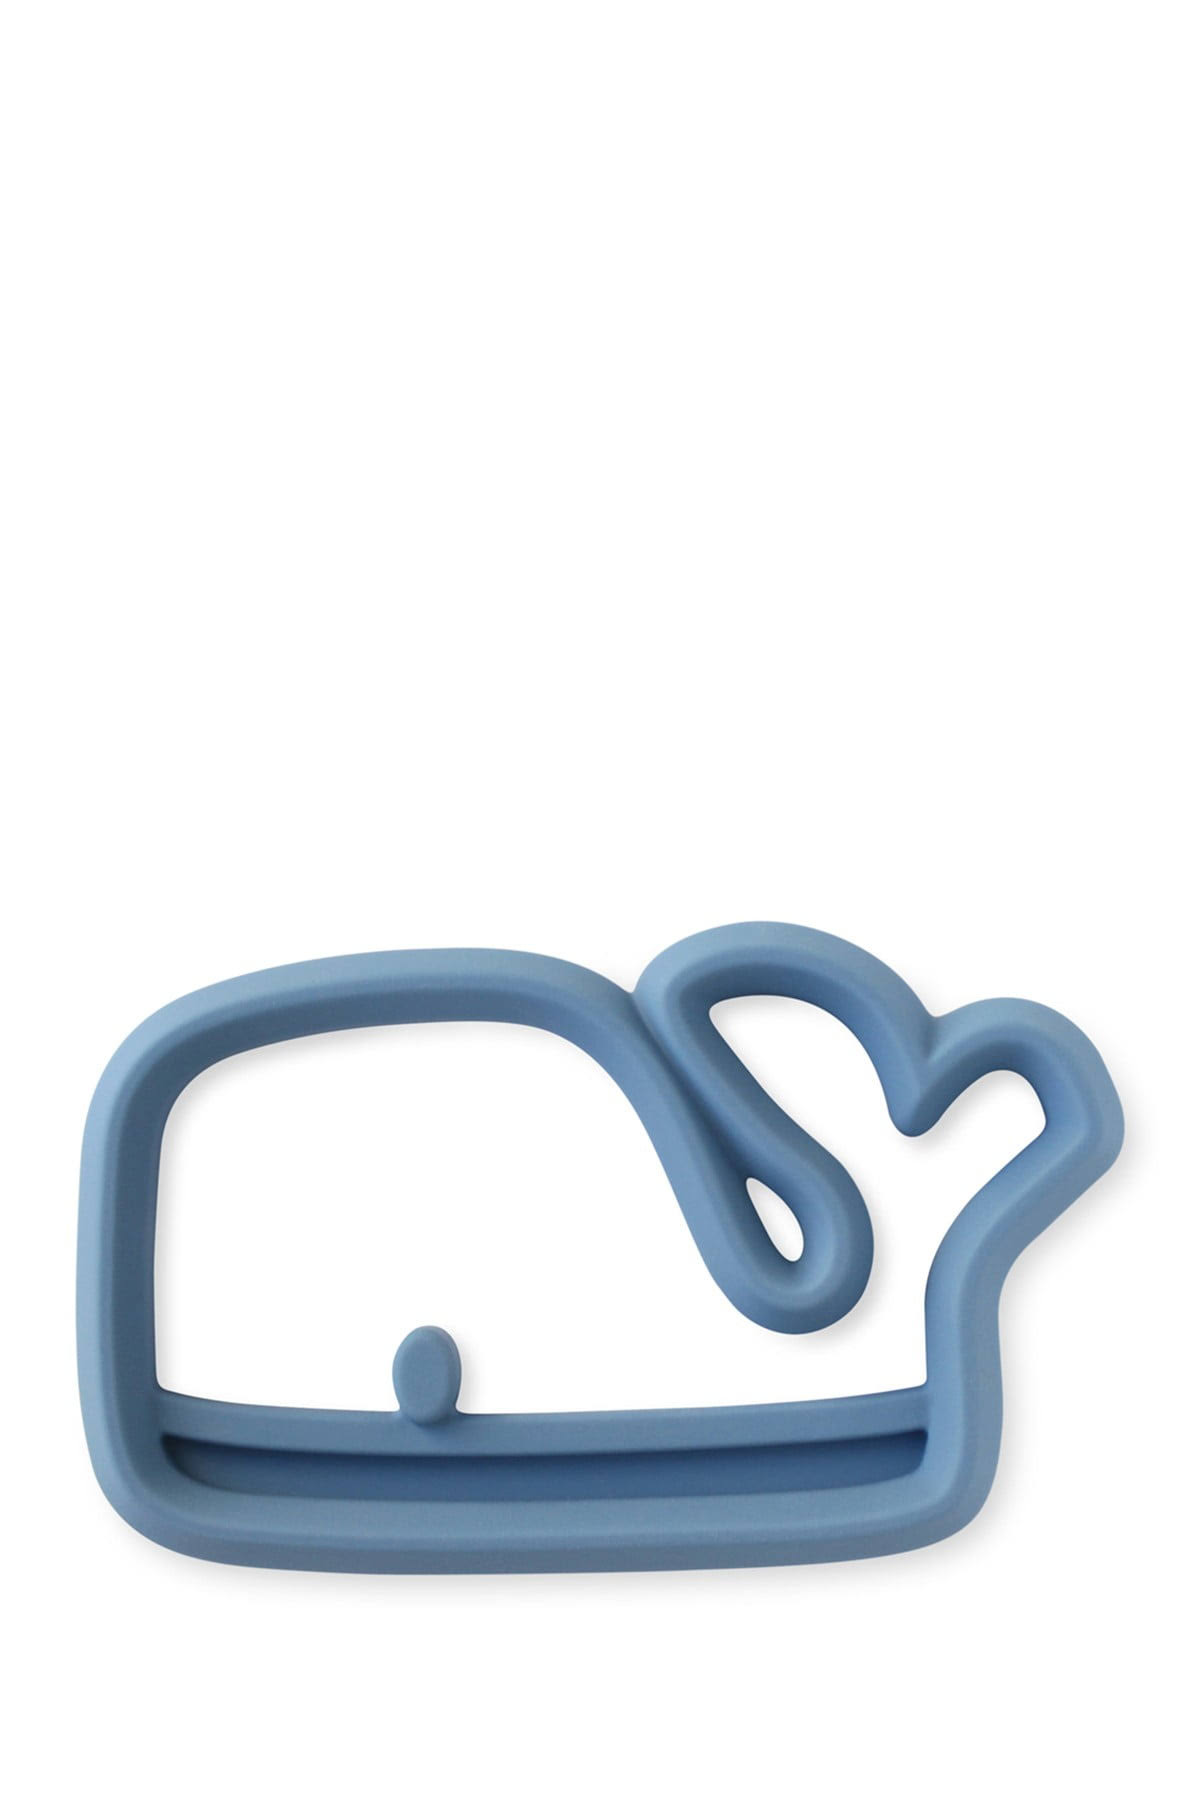 Itzy Ritzy Silicone Teether - Whale